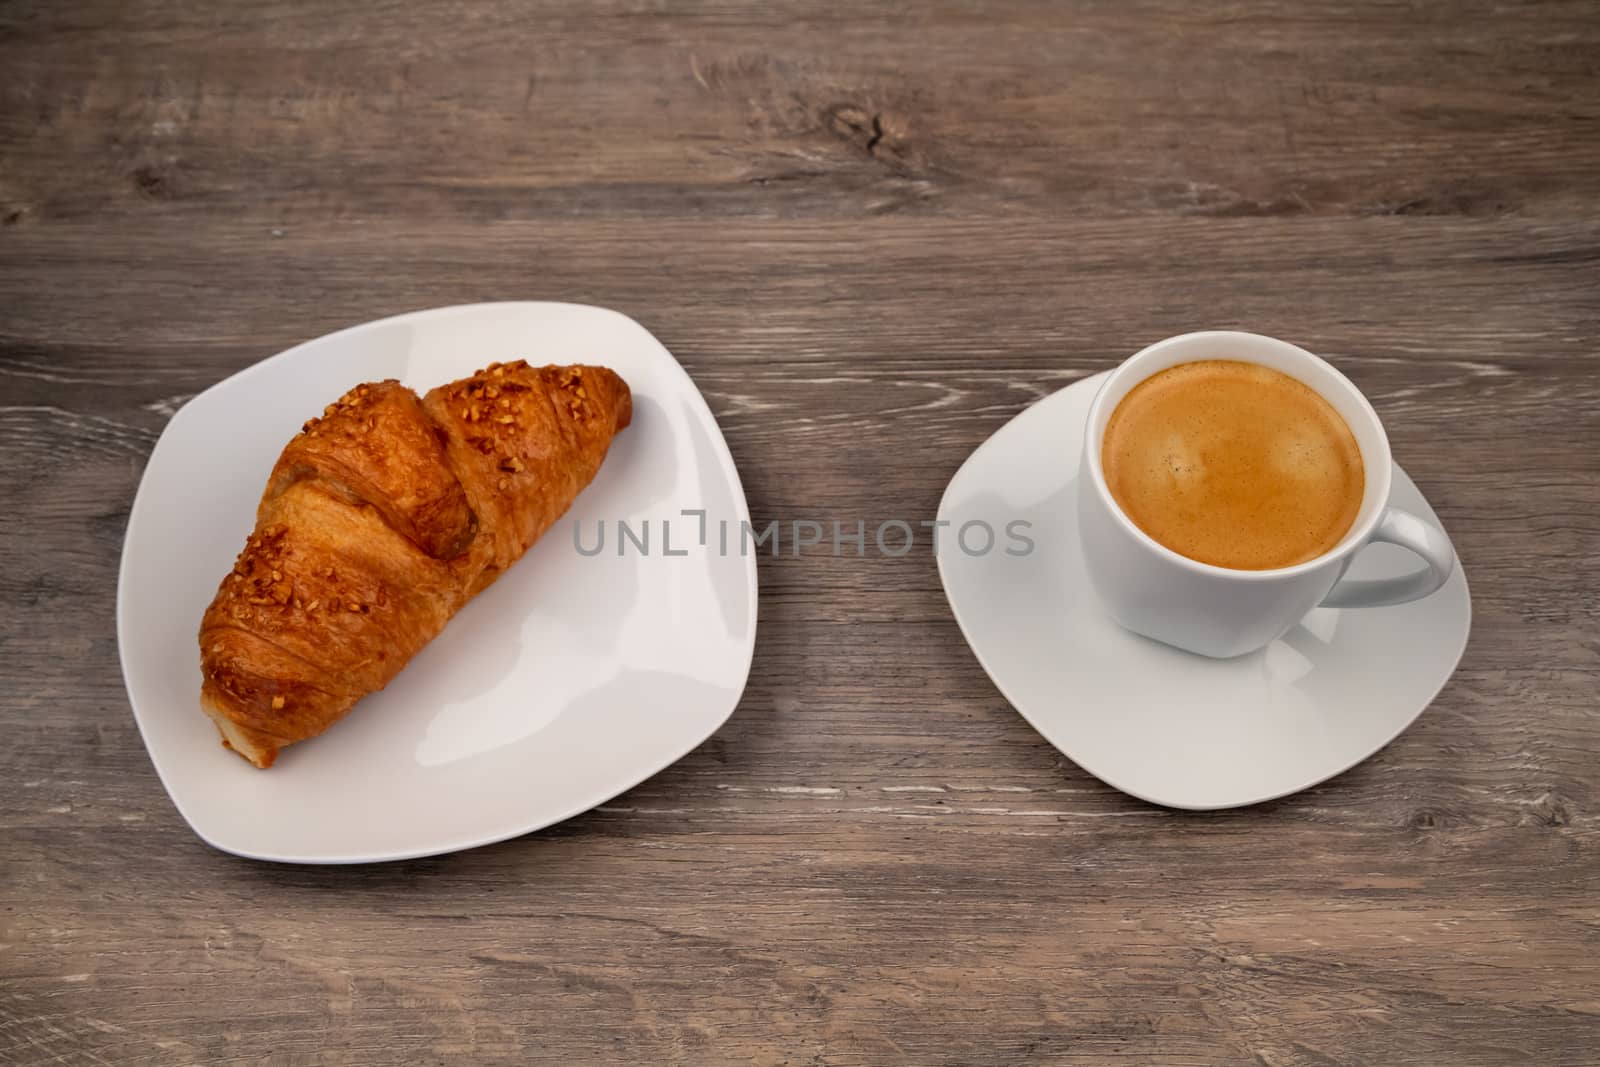 The breakfast with a delicious croissant on a plate and a coffee